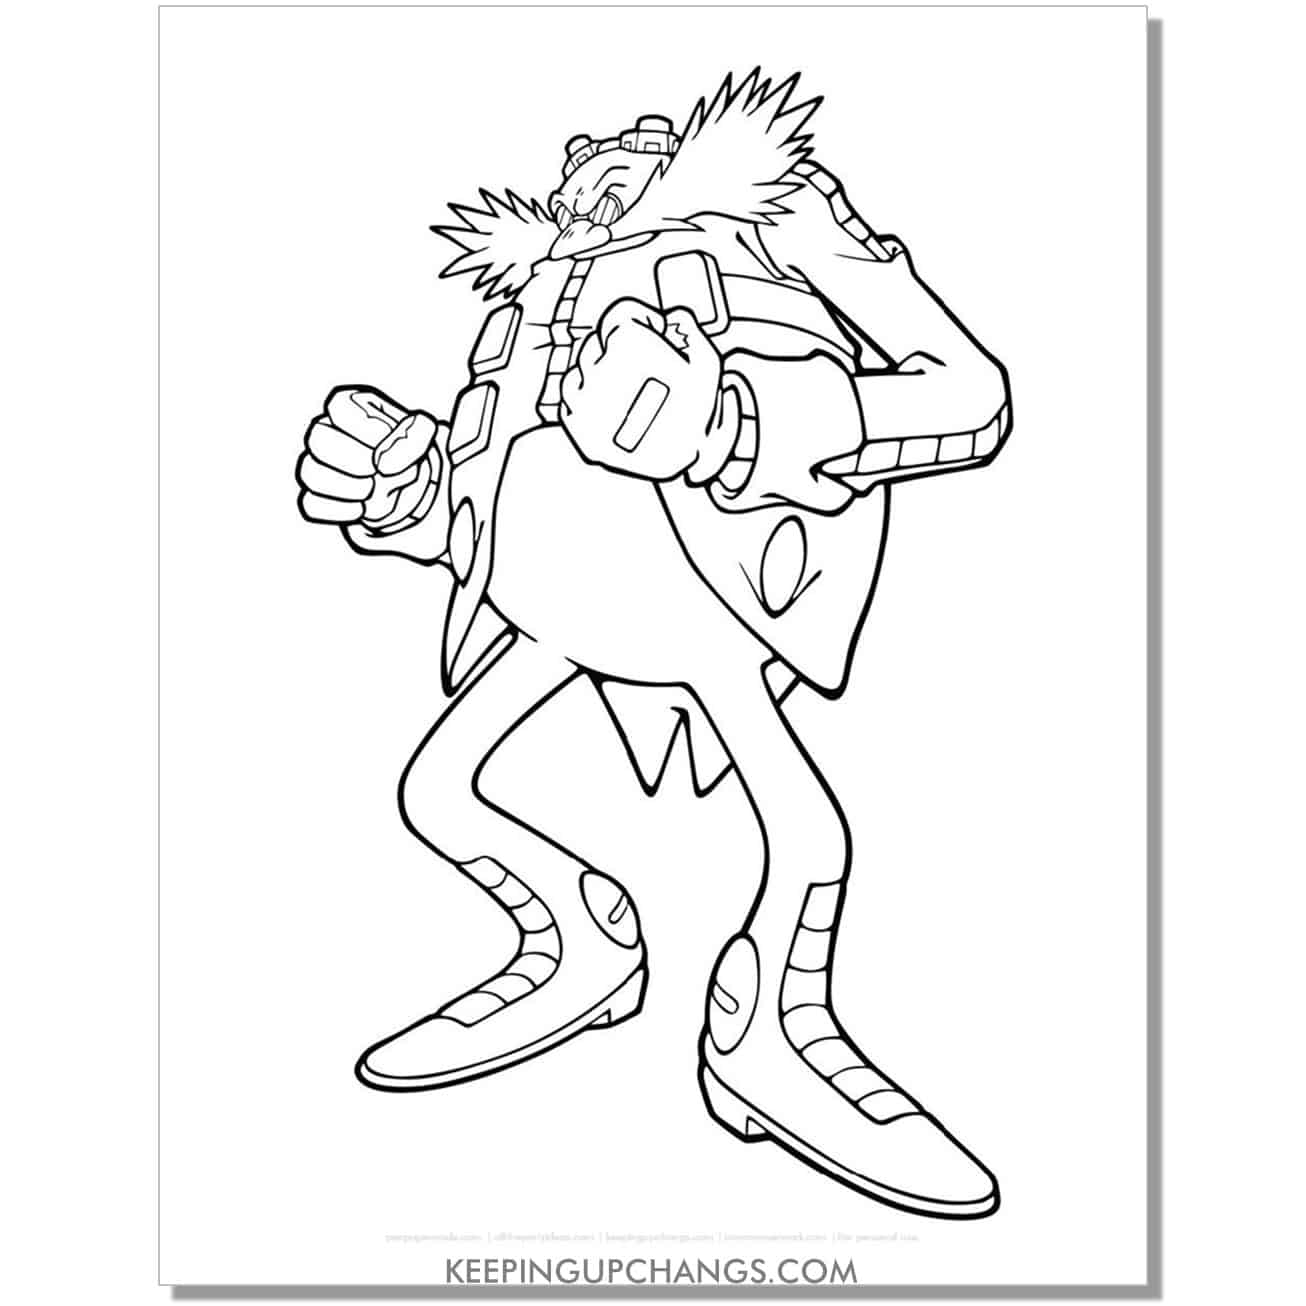 angry doctor eggman sonic coloring page.